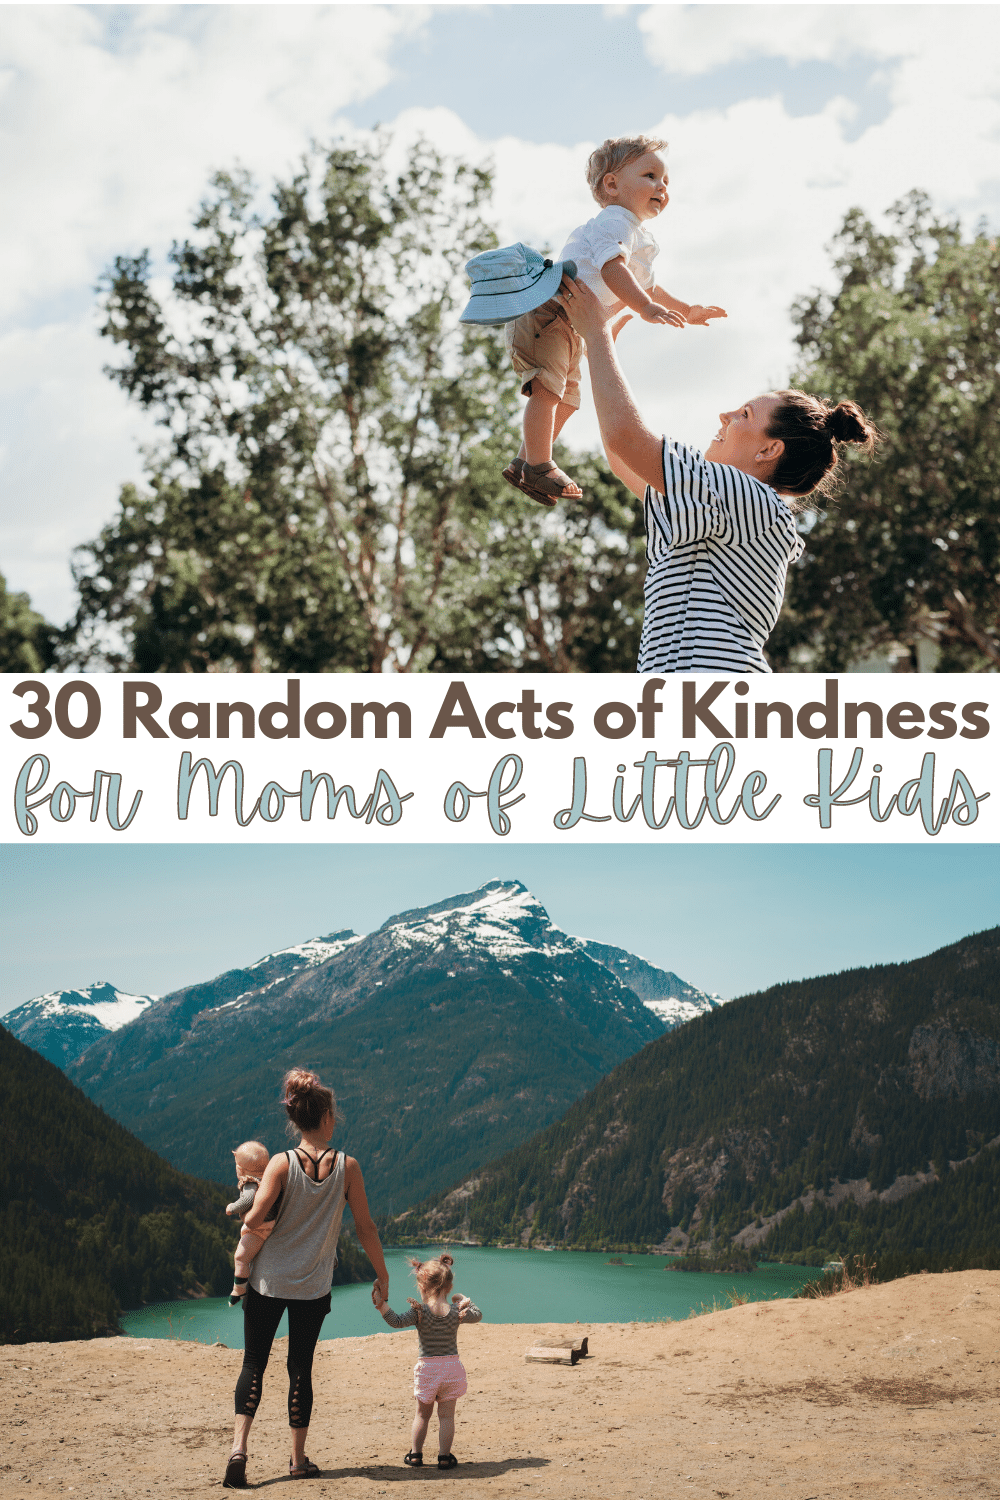 Spread kindness to moms of small children with these 30 random acts of kindness to inspire compassion, support and camaraderie. #randomactsofkindness #formoms #momlife via @wondermomwannab